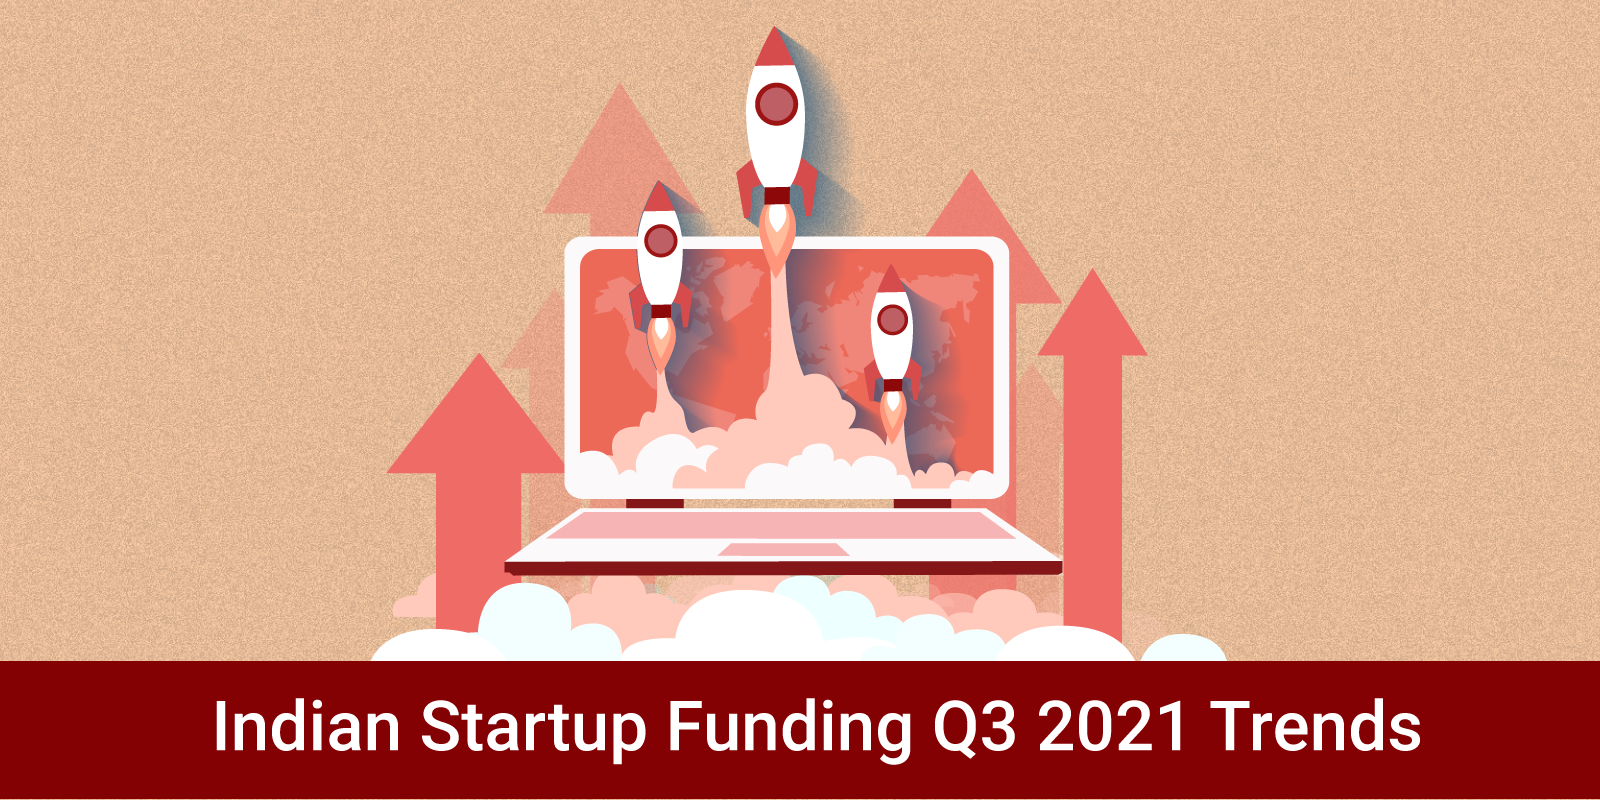 Indian startups go ballistic in Q3 2021, raise highest ever Y-o-Y funding in past 7 years